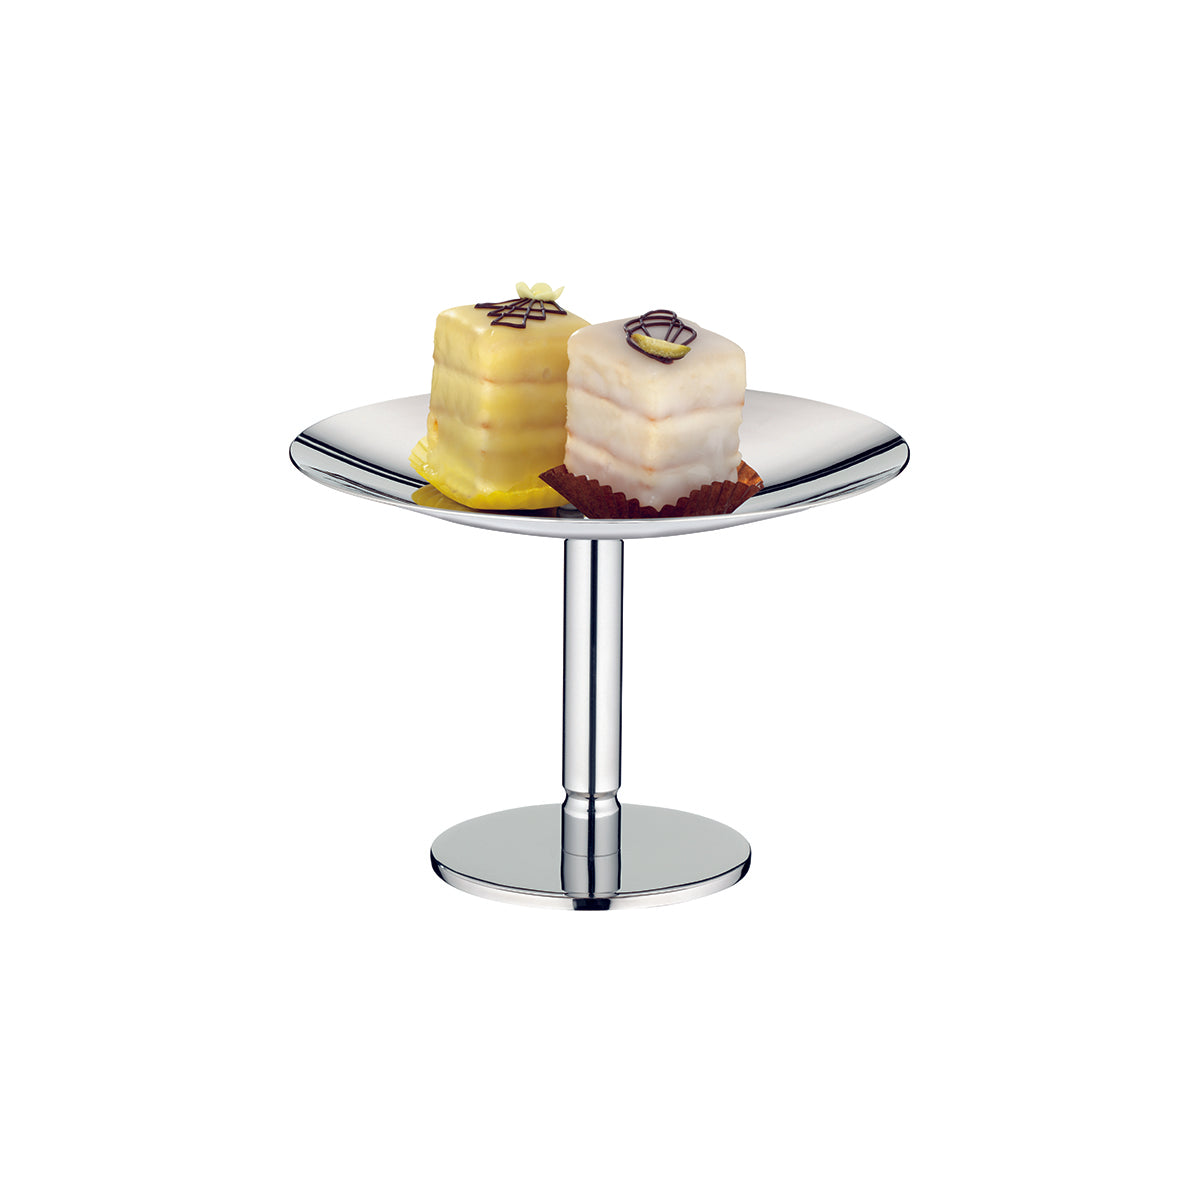 06.8254.6040 WMF Pure 2-Tier Pastry Stand 200x145mm Tomkin Australia Hospitality Supplies